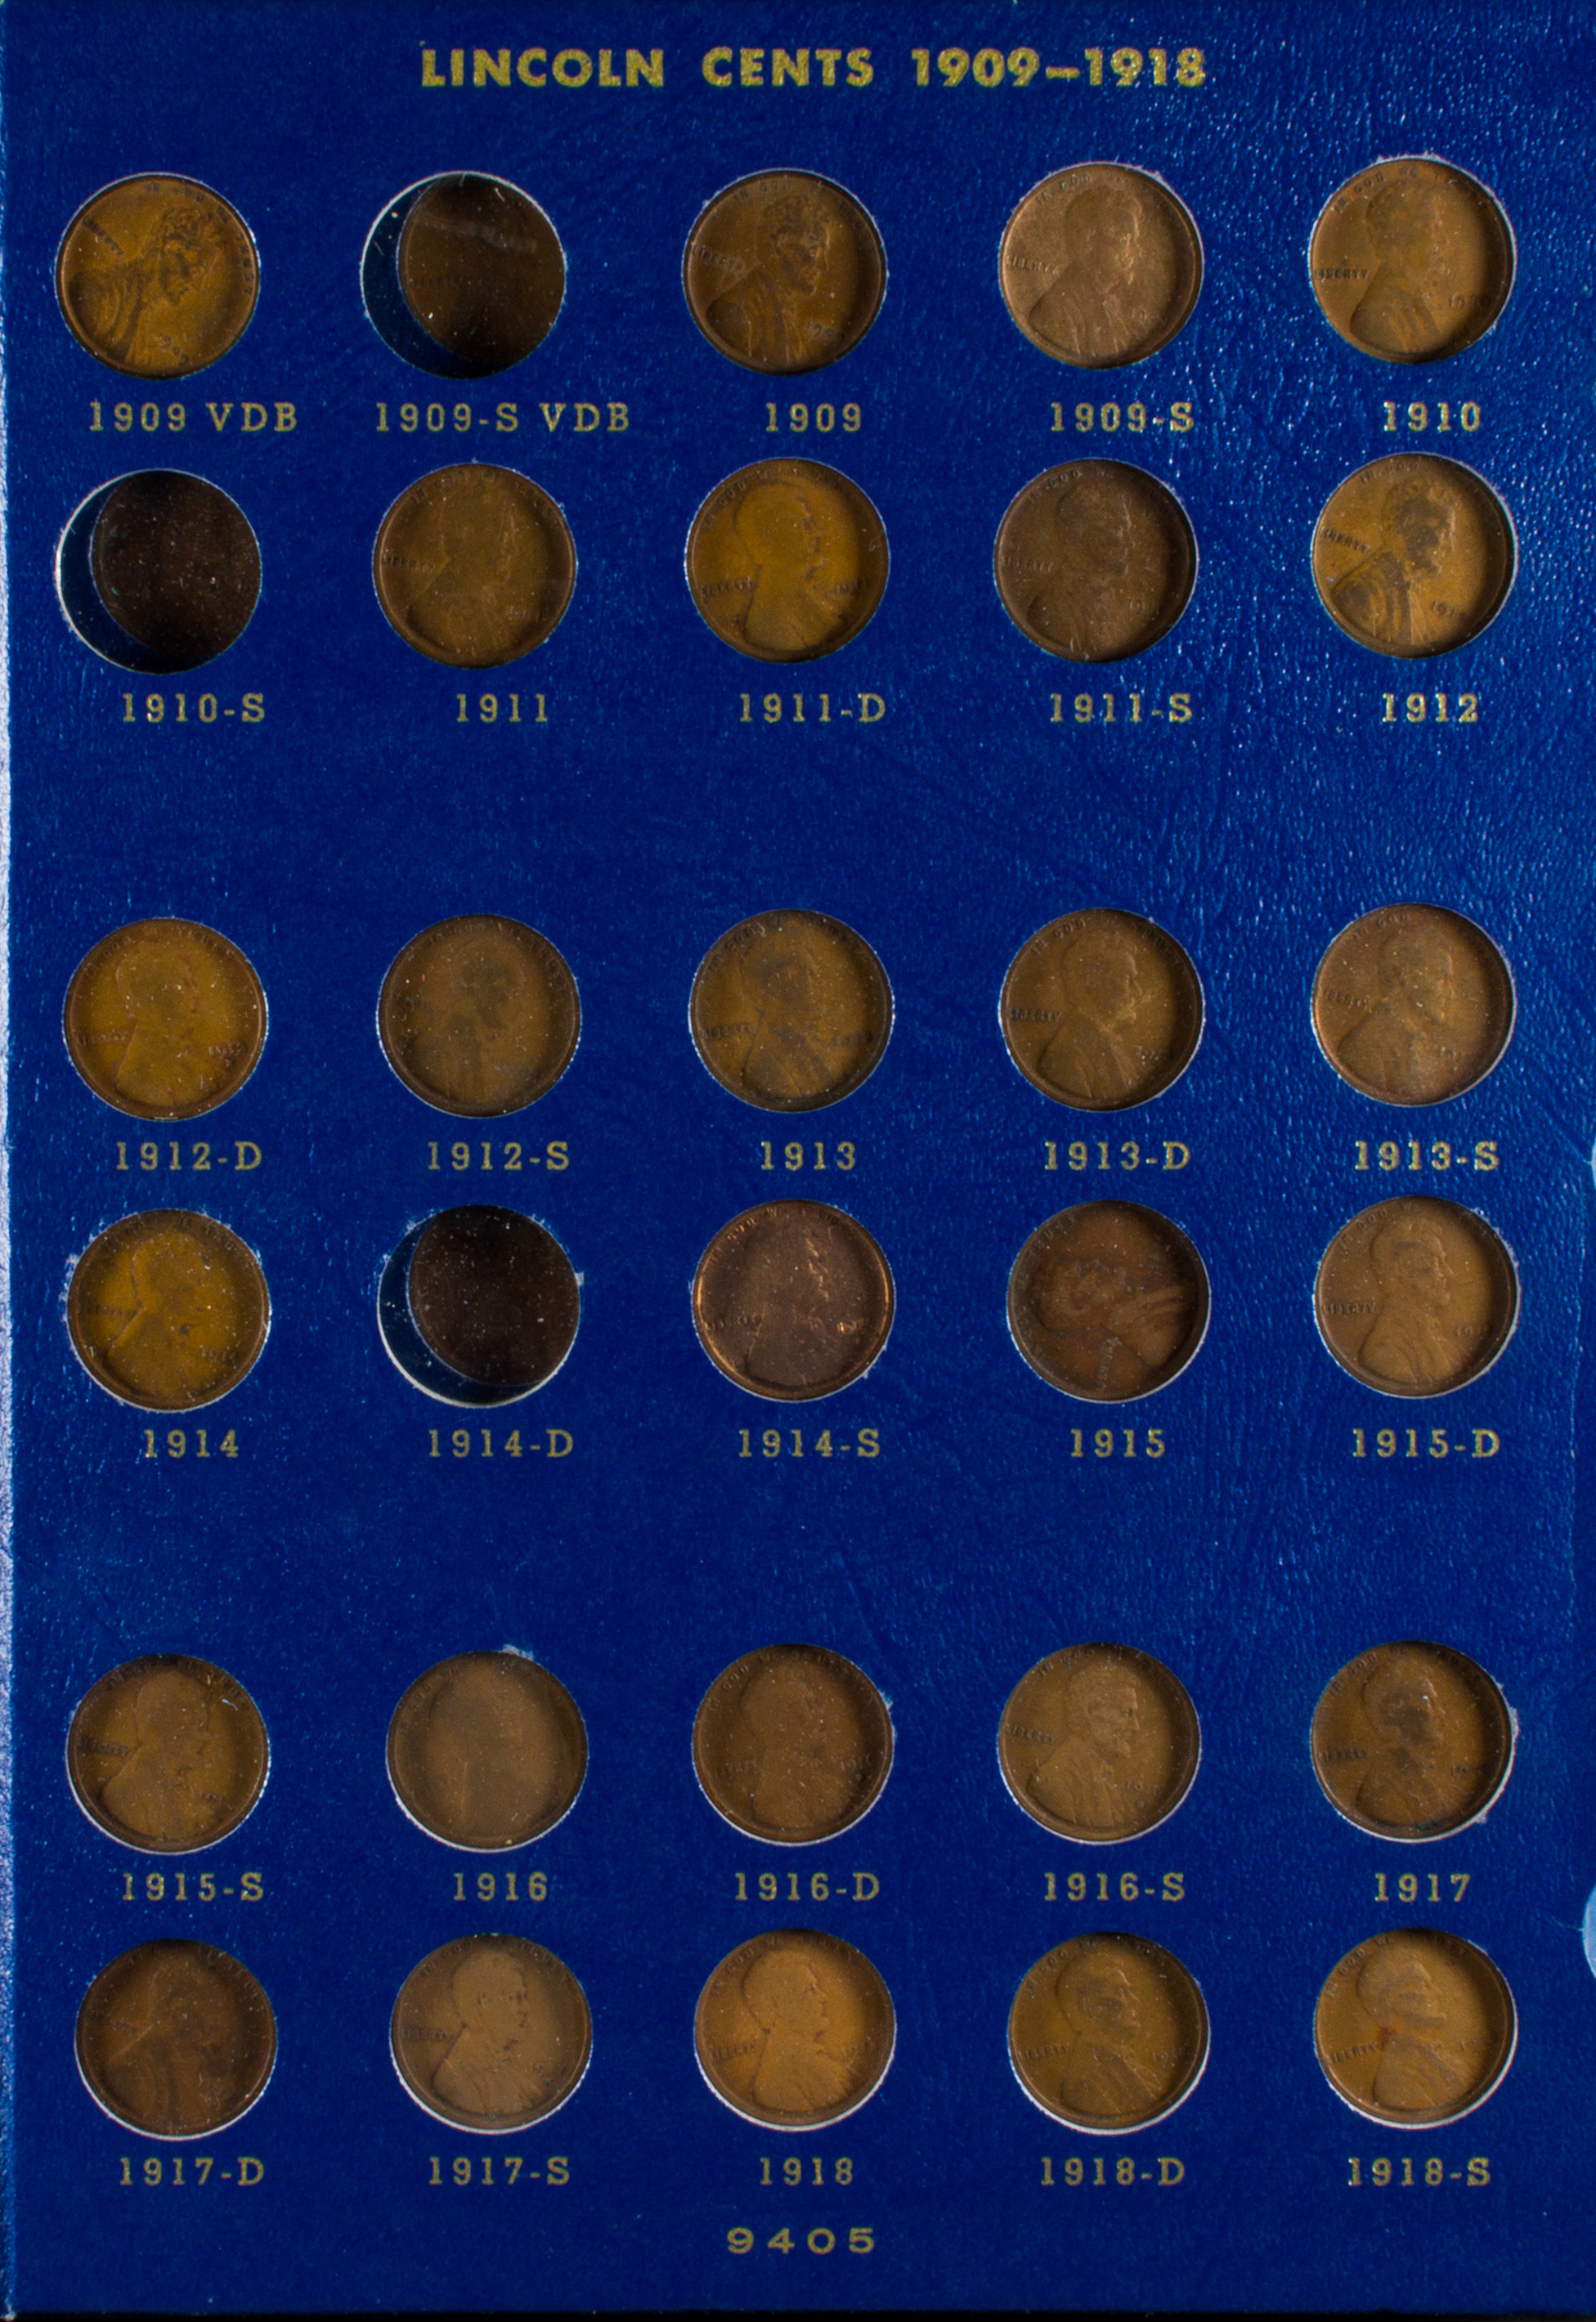 LINCOLN CENT COLLECTION 1909 1940 3a4849